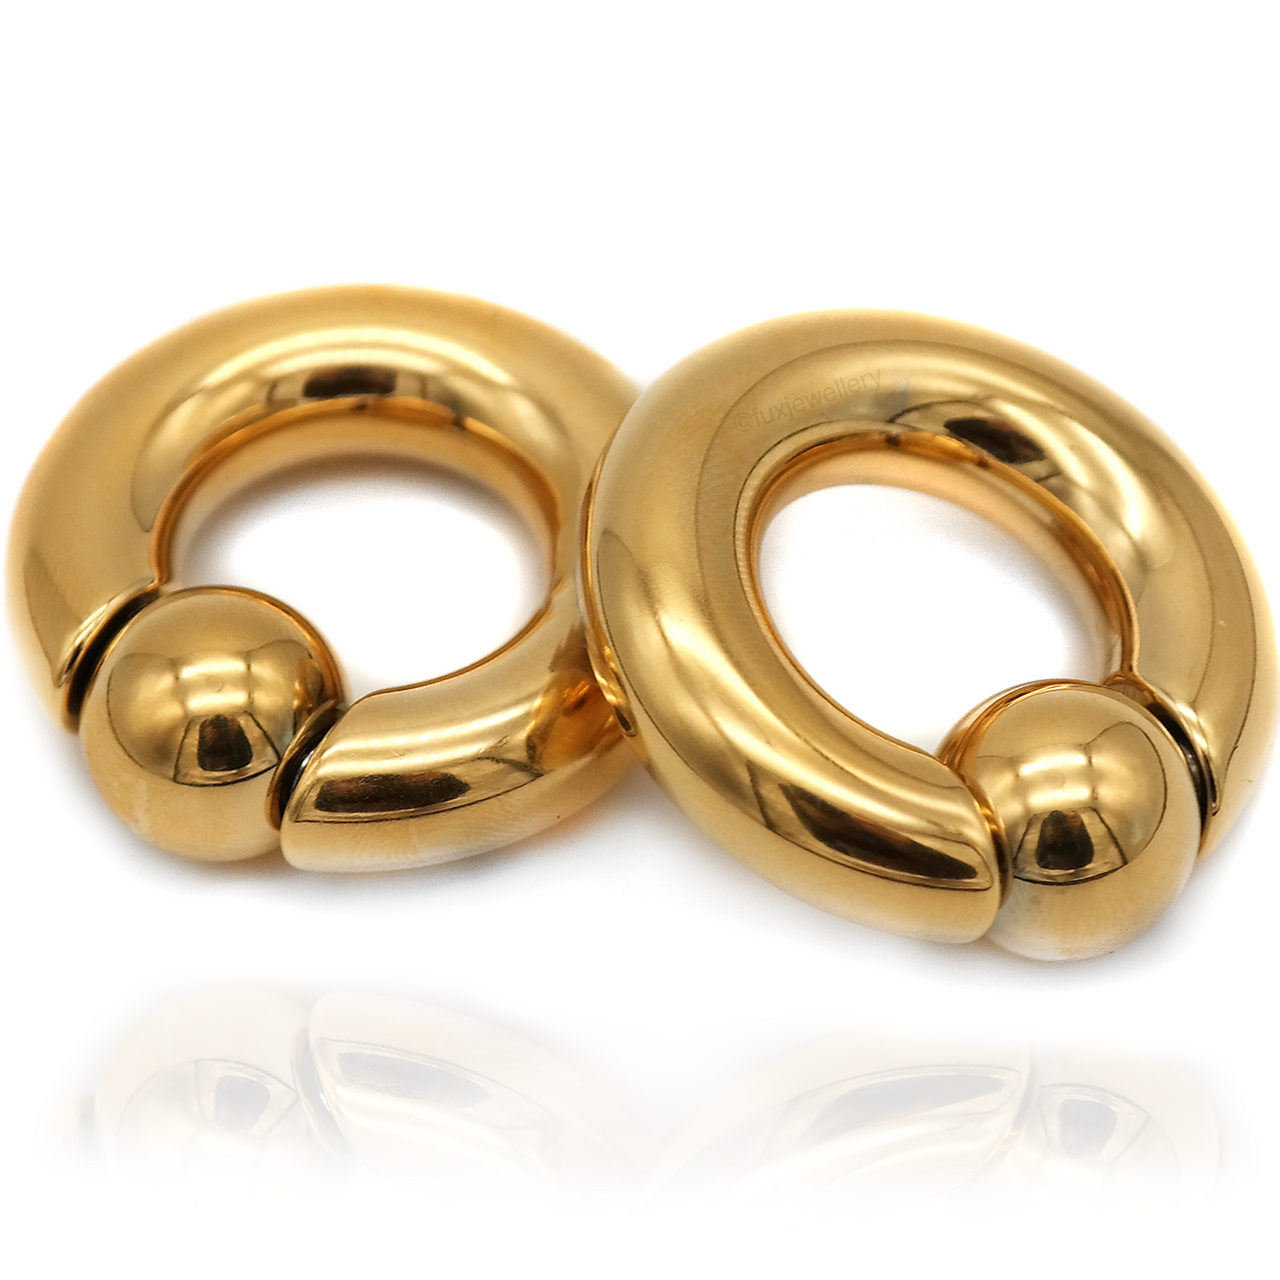 Gold Ball Closure Ring Ear Weights